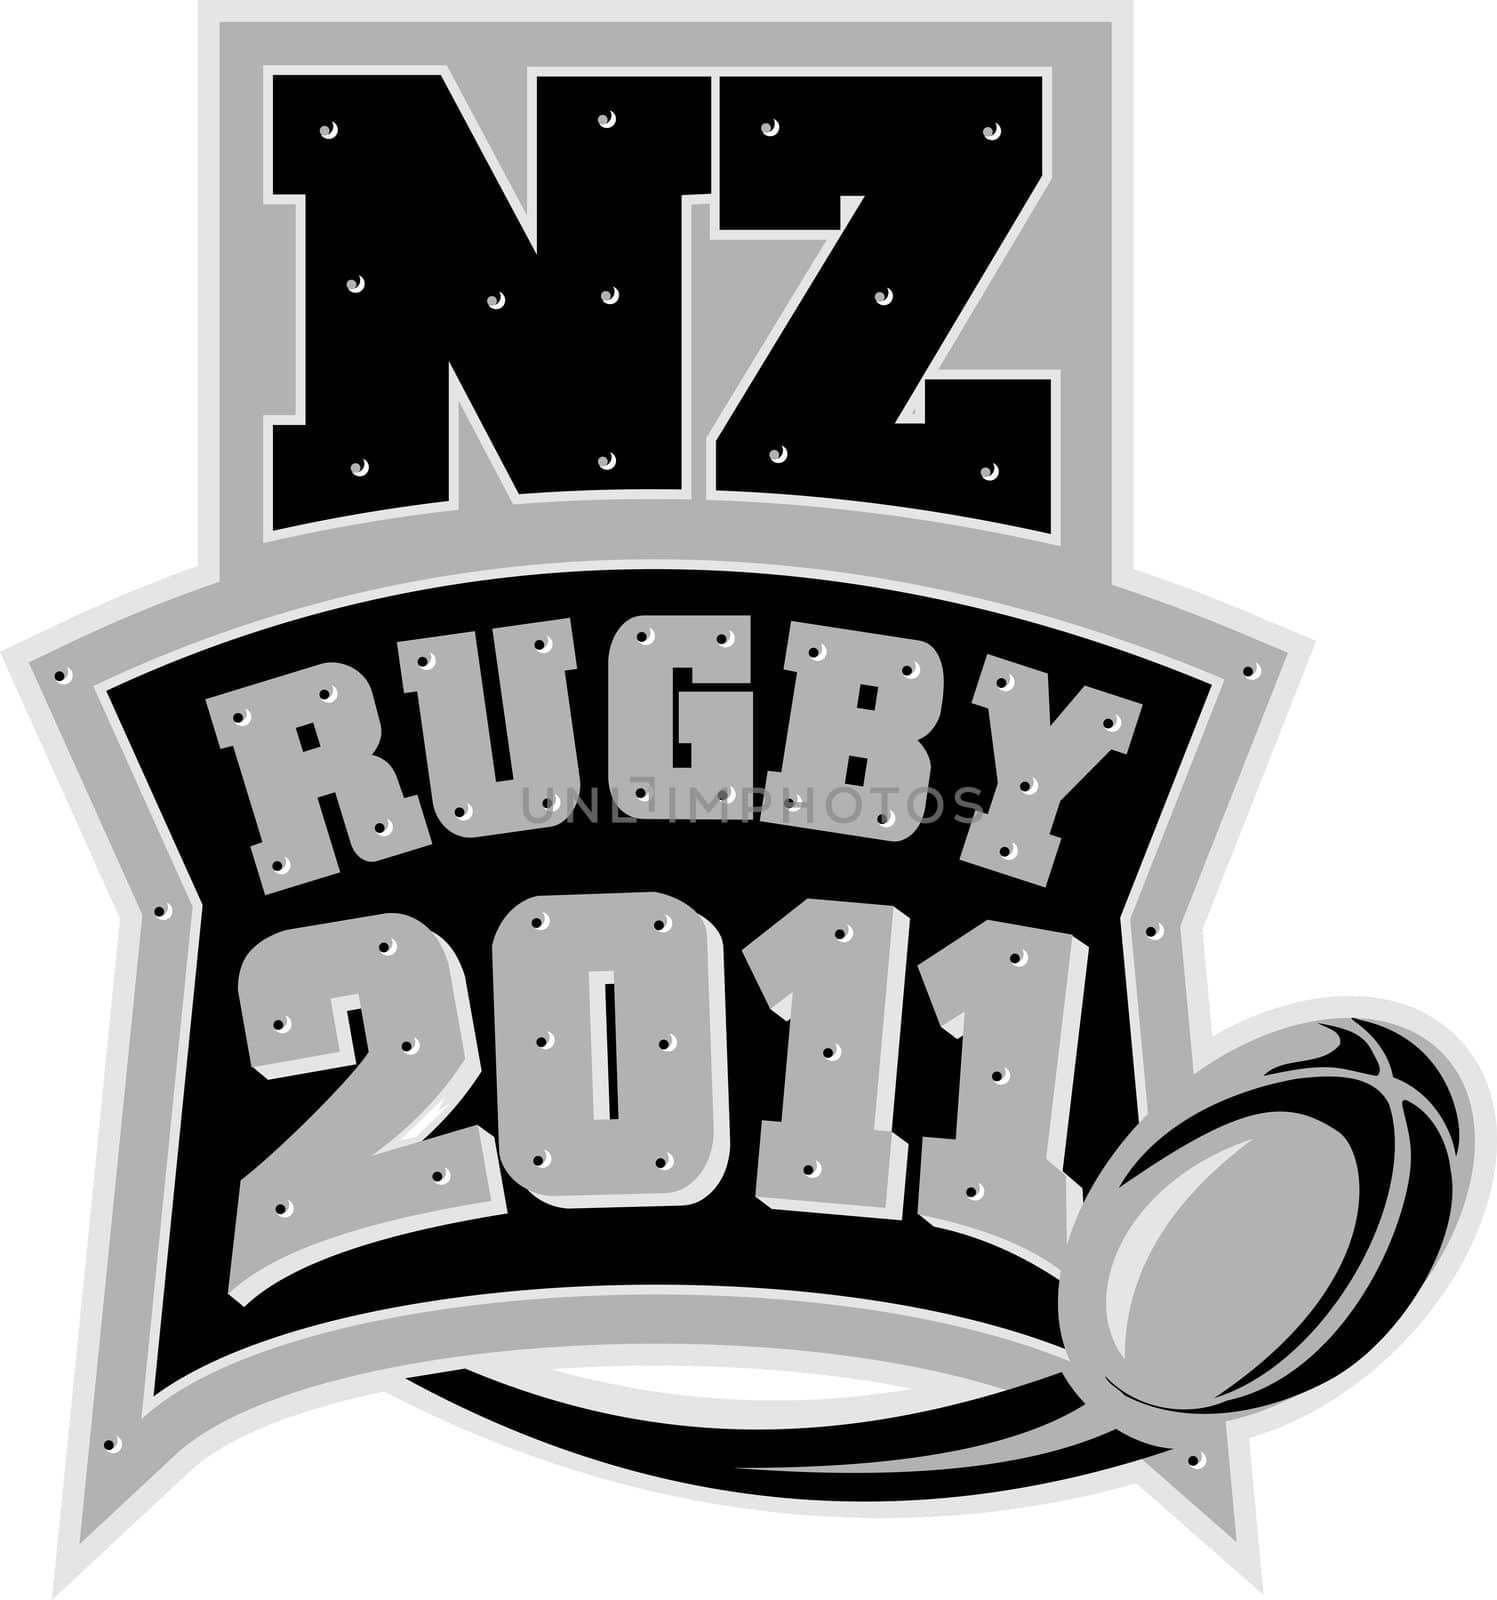 illustration of a ball flying with words New Zealand Rugby 2011